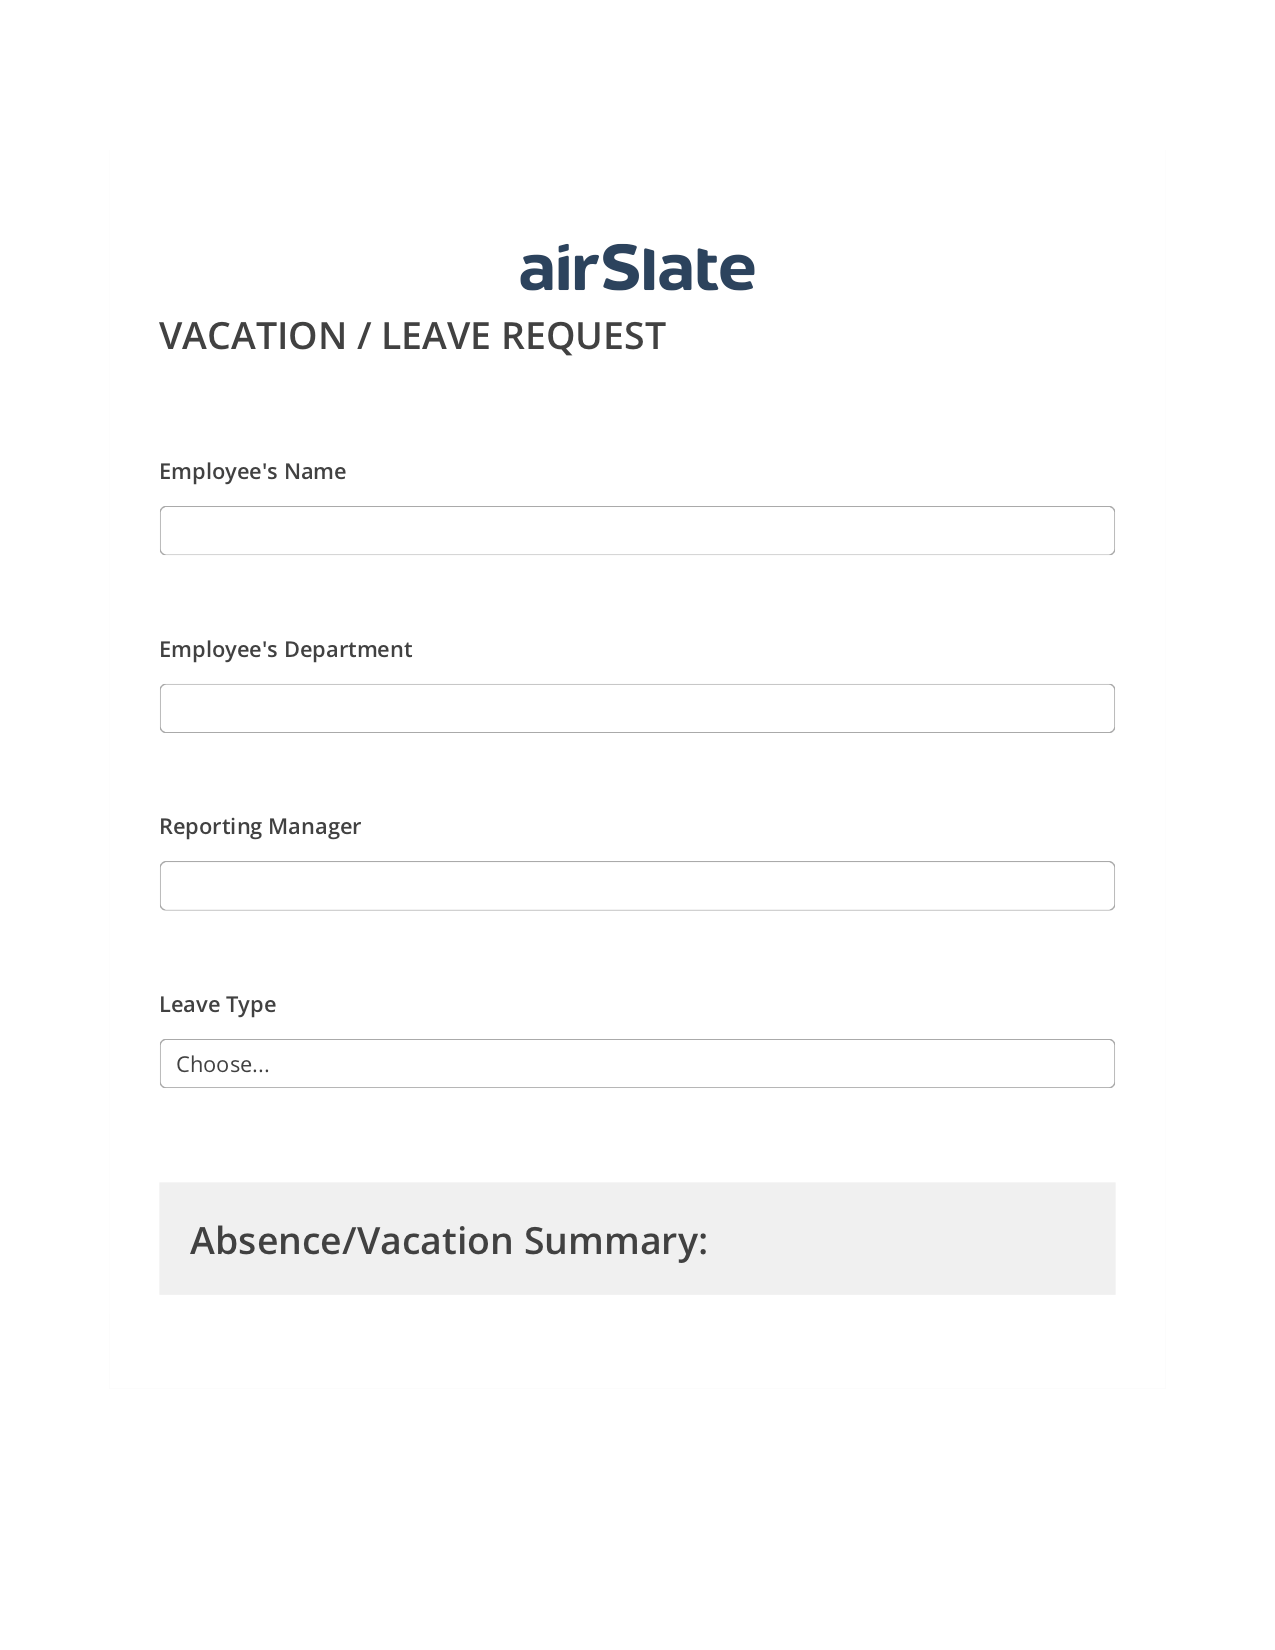 Vacation/Leave Request Workflow Pre-fill from MySQL Bot, Send a Slate with Roles Bot, Archive to Dropbox Bot